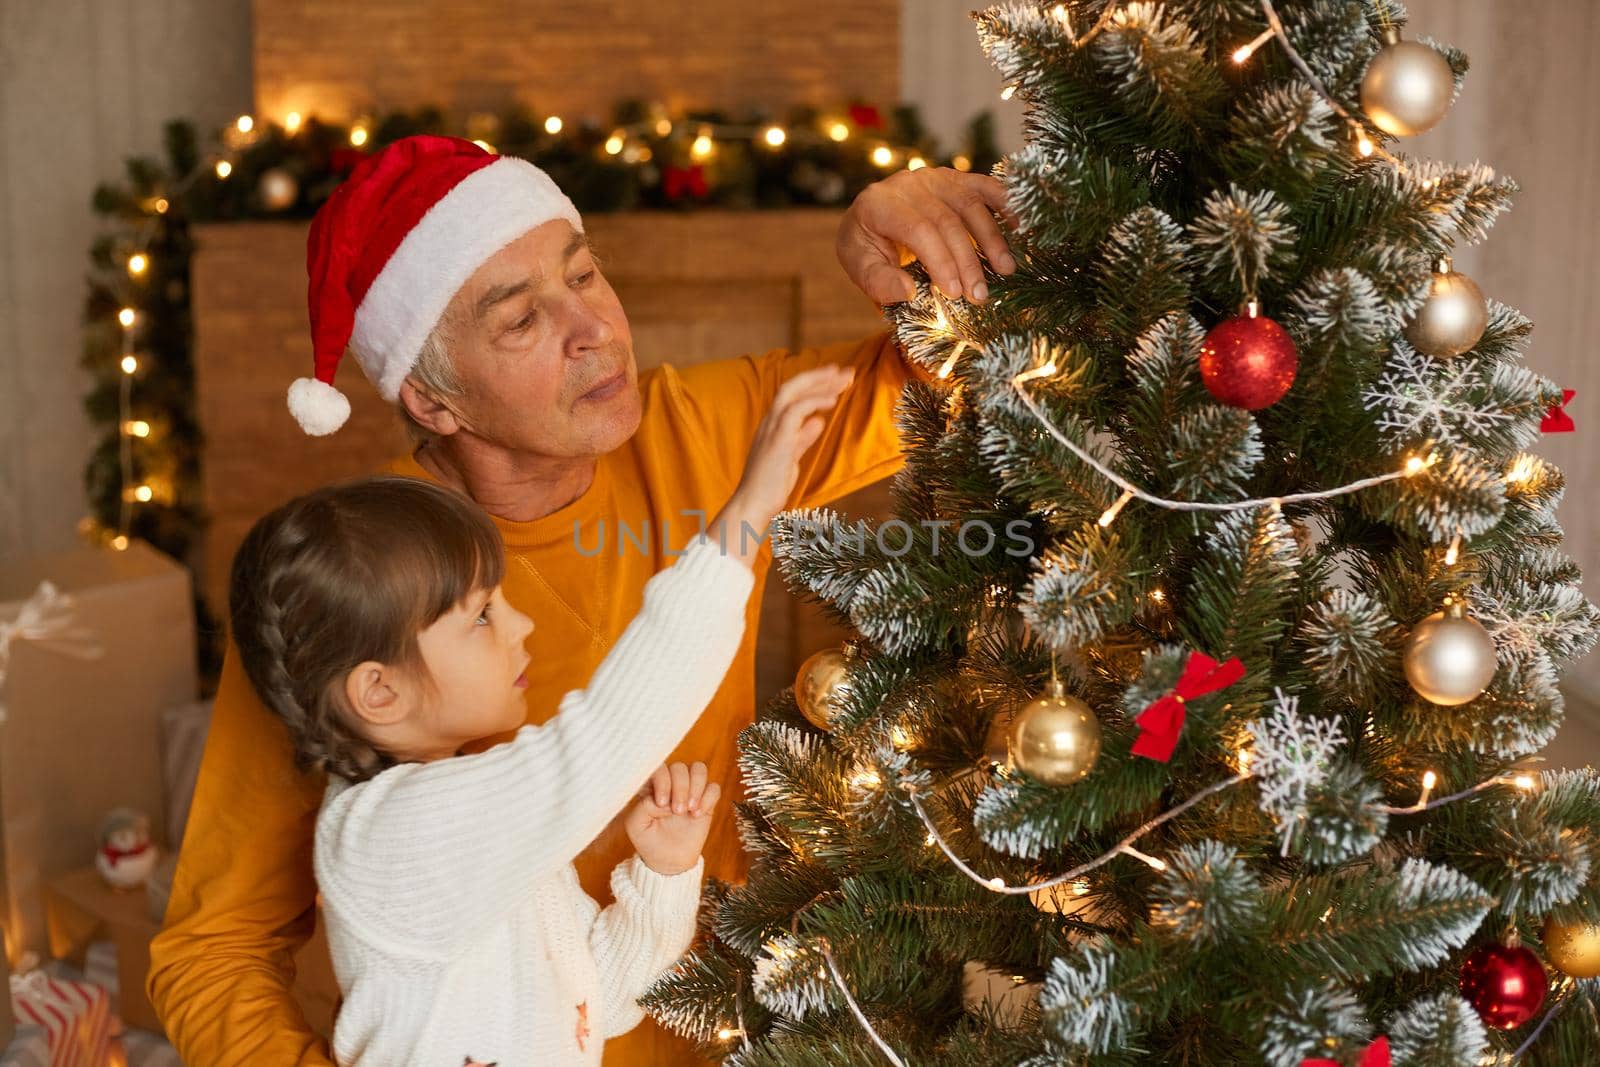 Family decorating christmas tree at home, grandfather spending time with his daughter on new year eve, senior man wearing santa claus hat and yellow shirt, child with pigtails in white jumper. by sementsovalesia